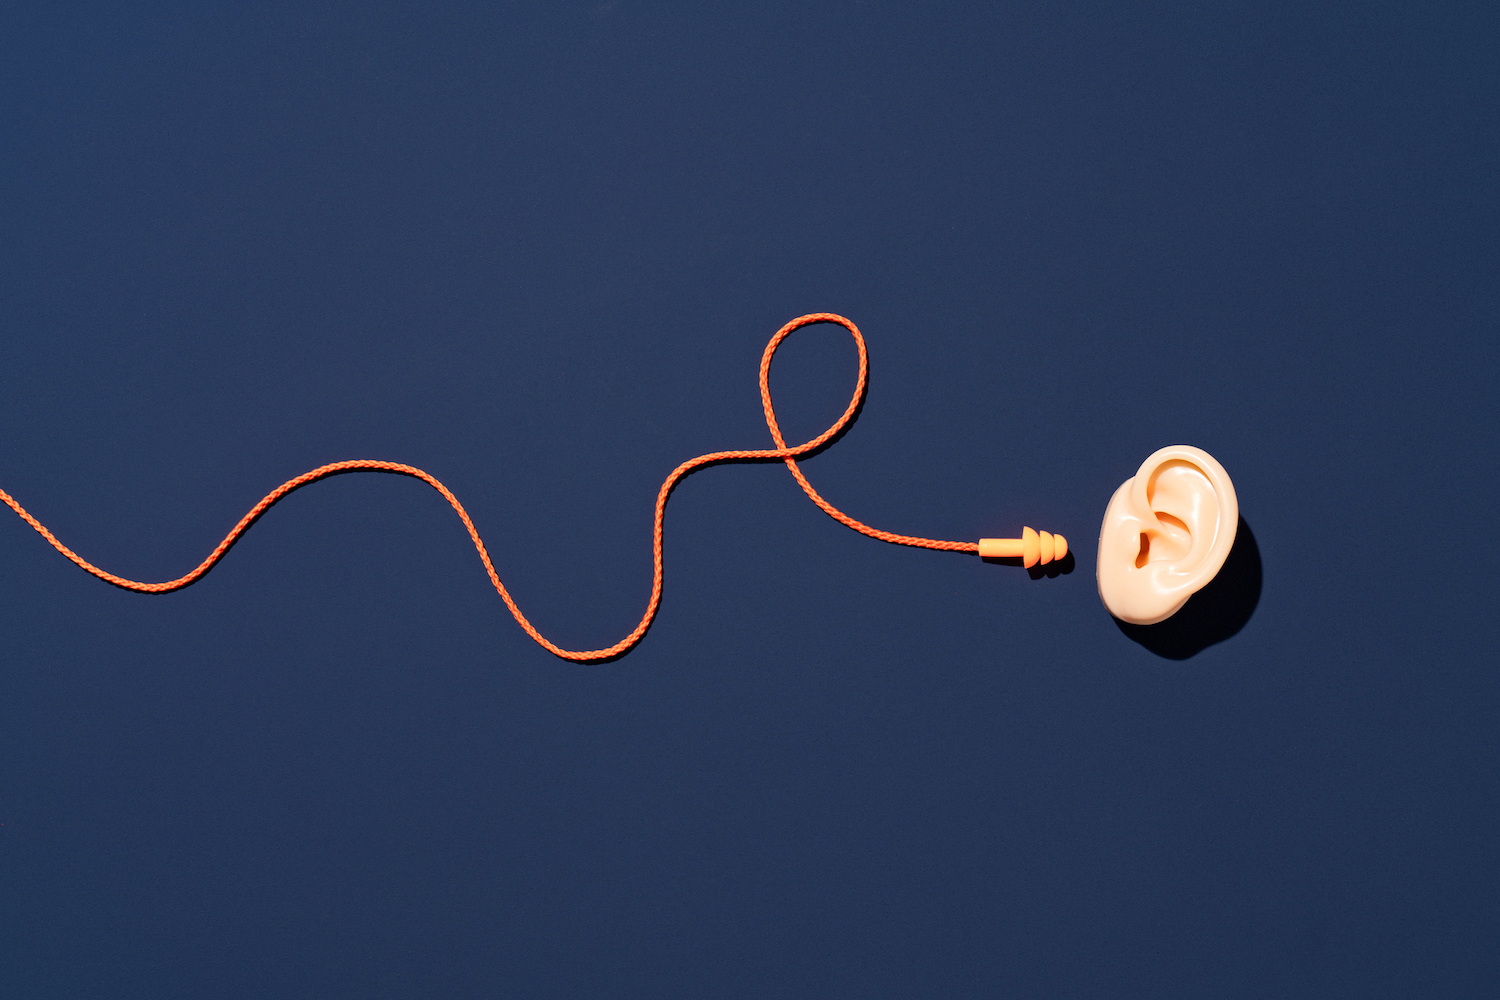 Orange earbuds with curved cord Reach to ear on blue background directly above view.  4 tips for RevOps teams to filter out the noise and focus on the big picture